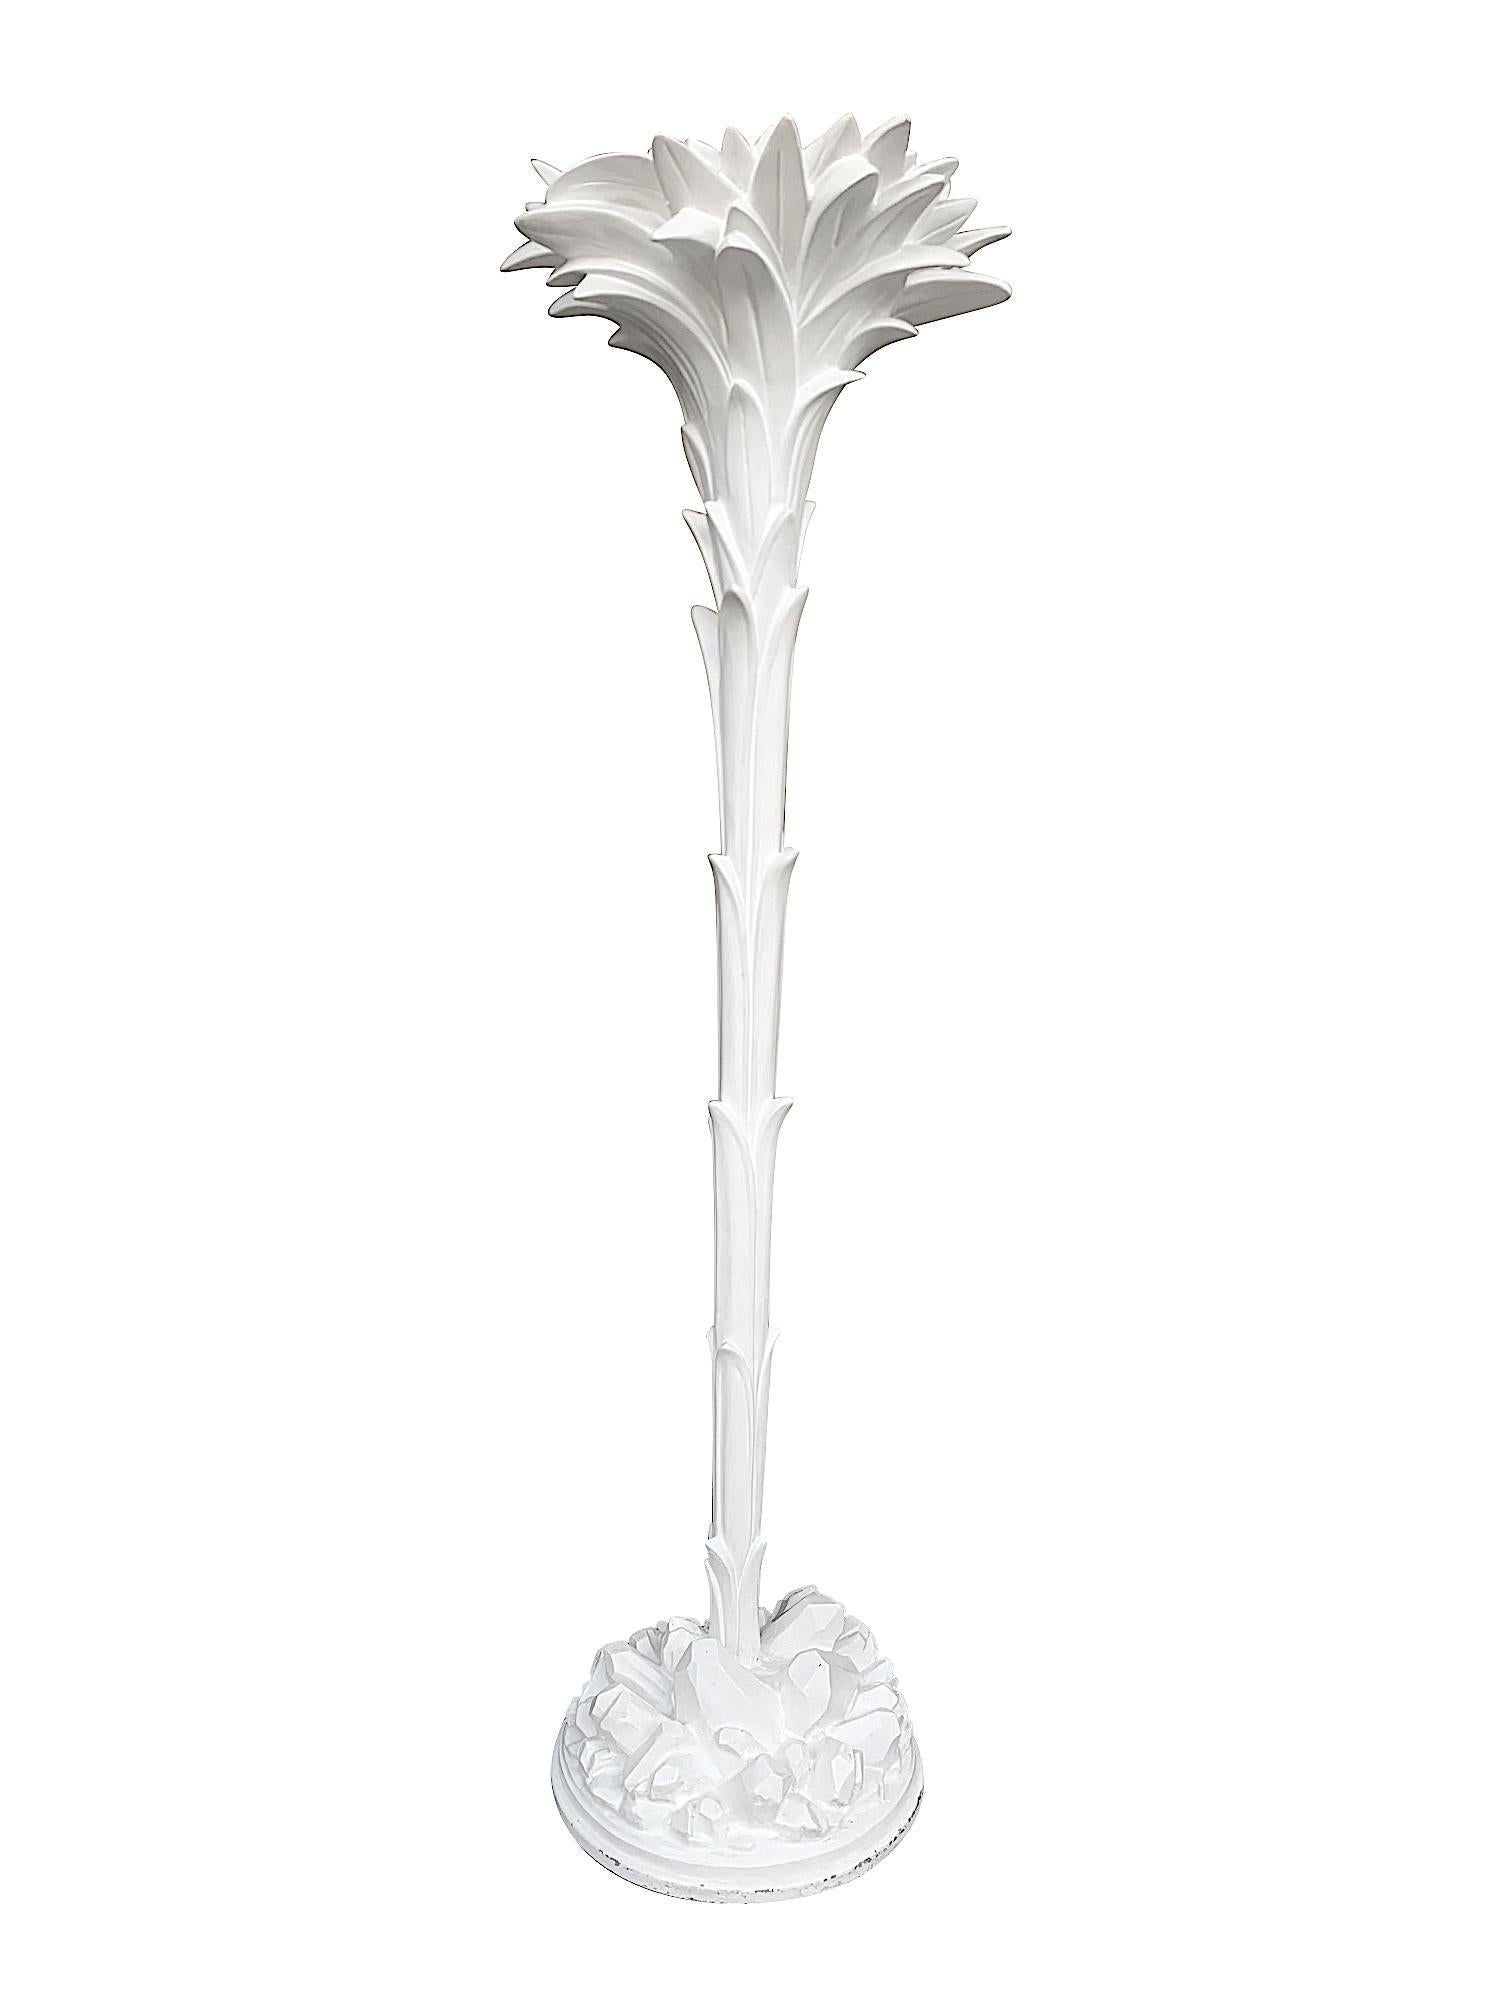 A 1970s Serge Roche style palm leaf floor lamp torchiere in cast resin and white plaster mounted on a white wooden base with stylized crystals. With single light fitting and original switch, re-wired with antique gold cord flex and PAT